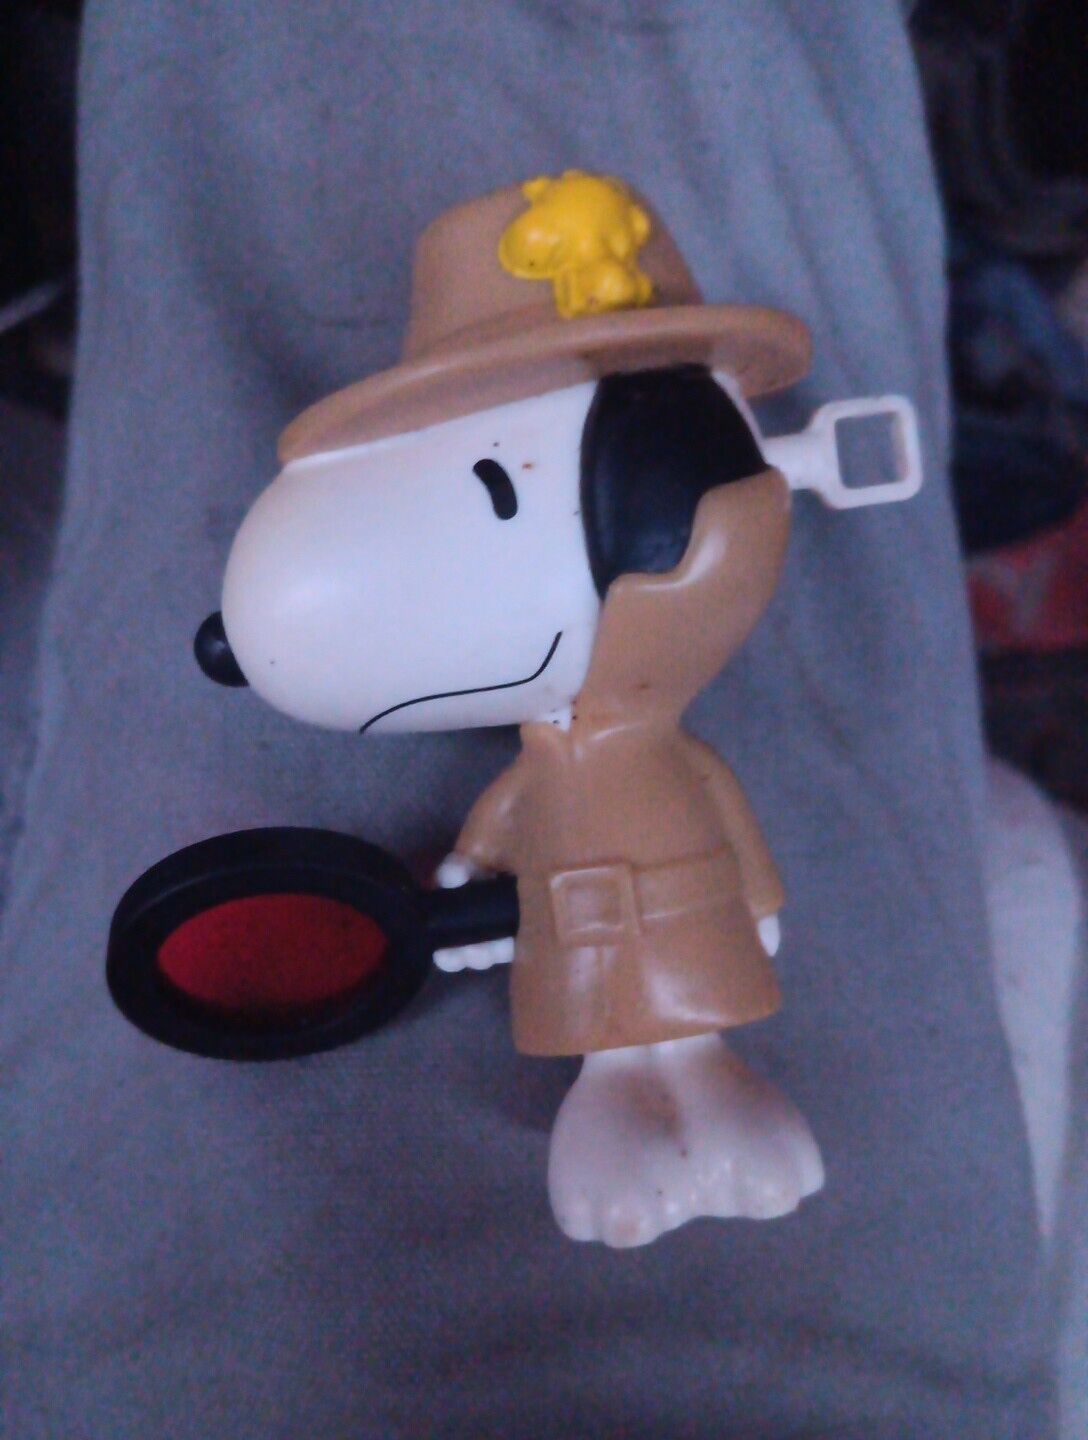 PEANUTS: 2018 DETECTIVE SNOOPY WINDUP MCDONALDS HAPPY MEAL TOY. 6 Figures in set